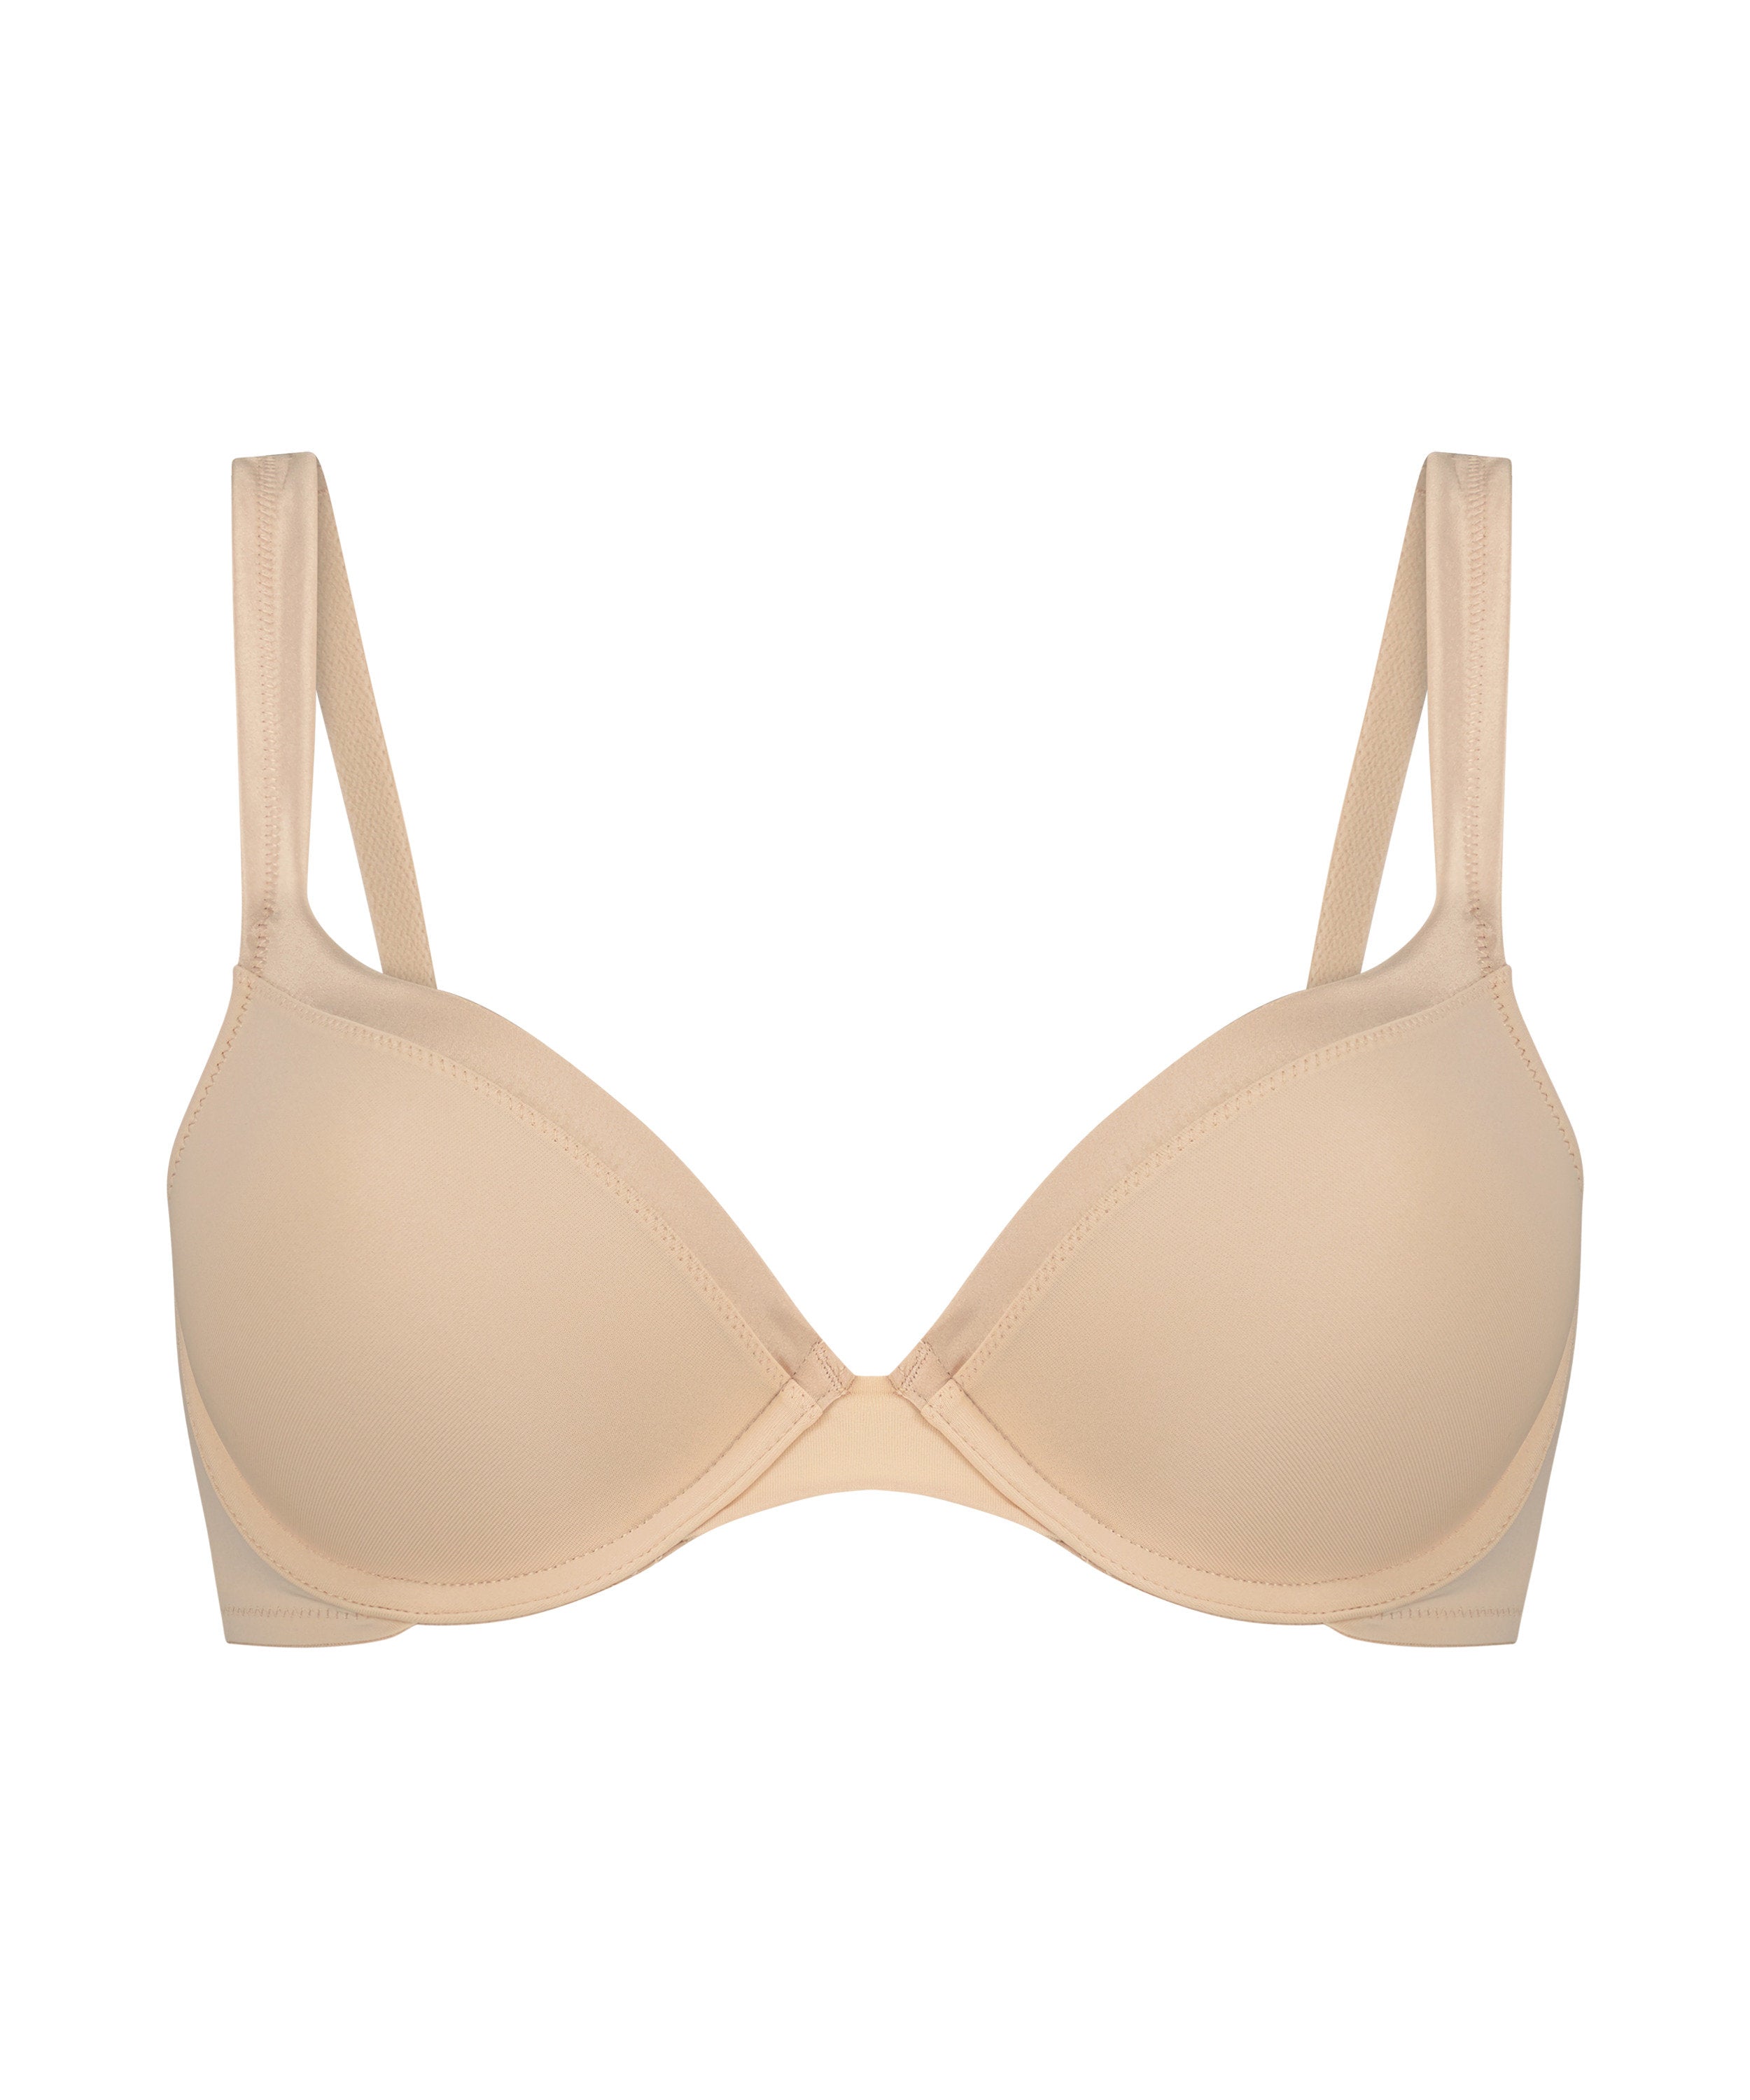 Satin Ts Pp In Different Cup Sizes_169211_Tan_01